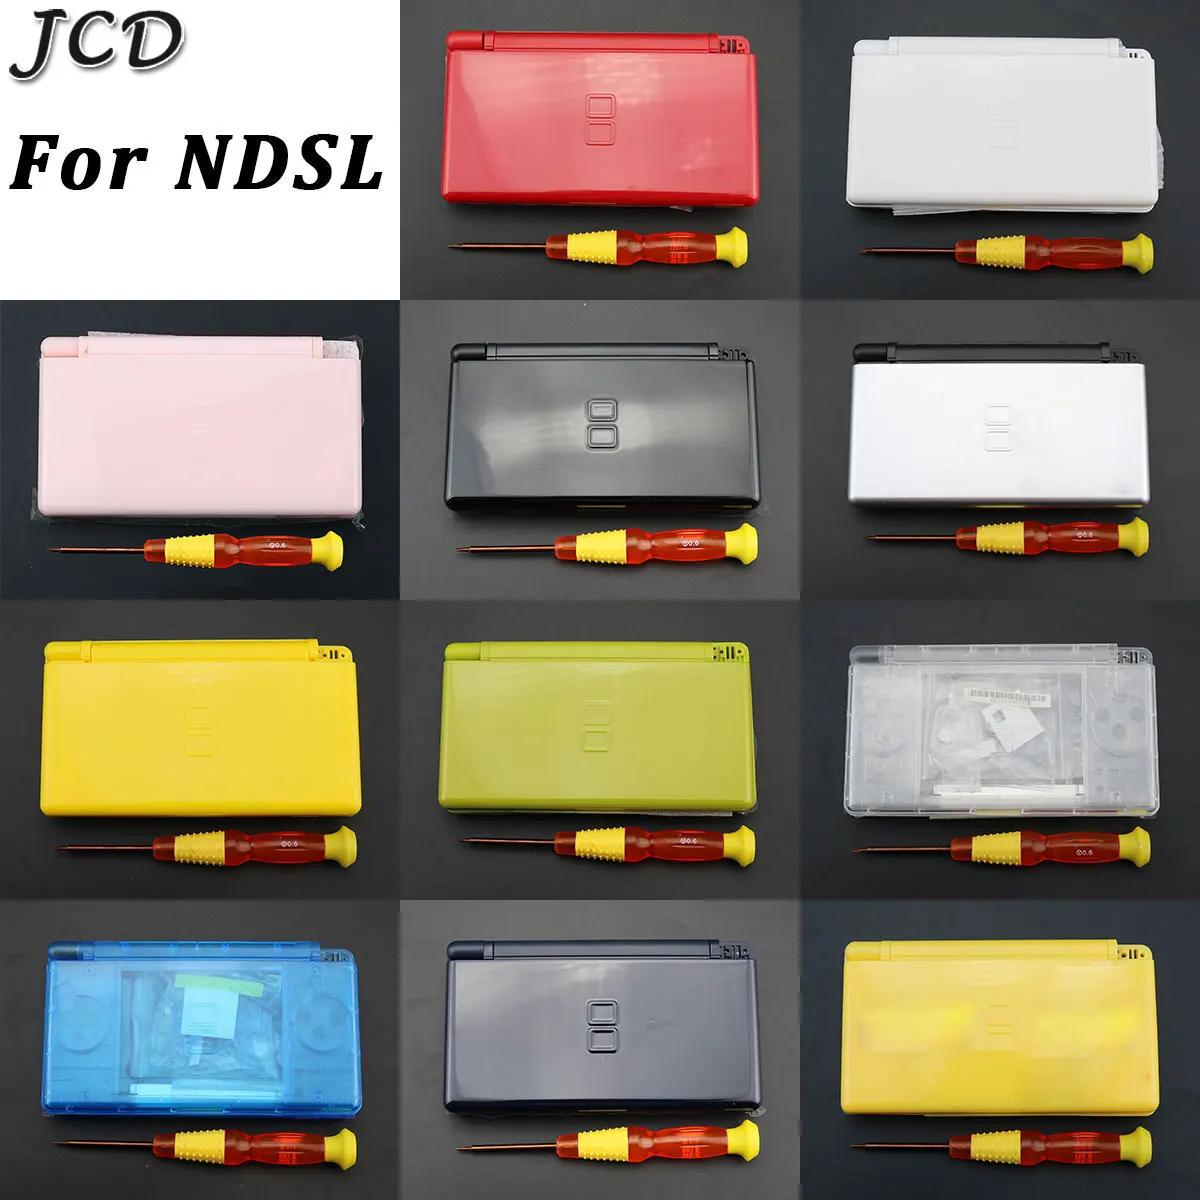 JCD Full Repair Parts Replacement Housing Shell Case Kit with Buttons Screws Kit Screwdriver for DS Lite NDSL